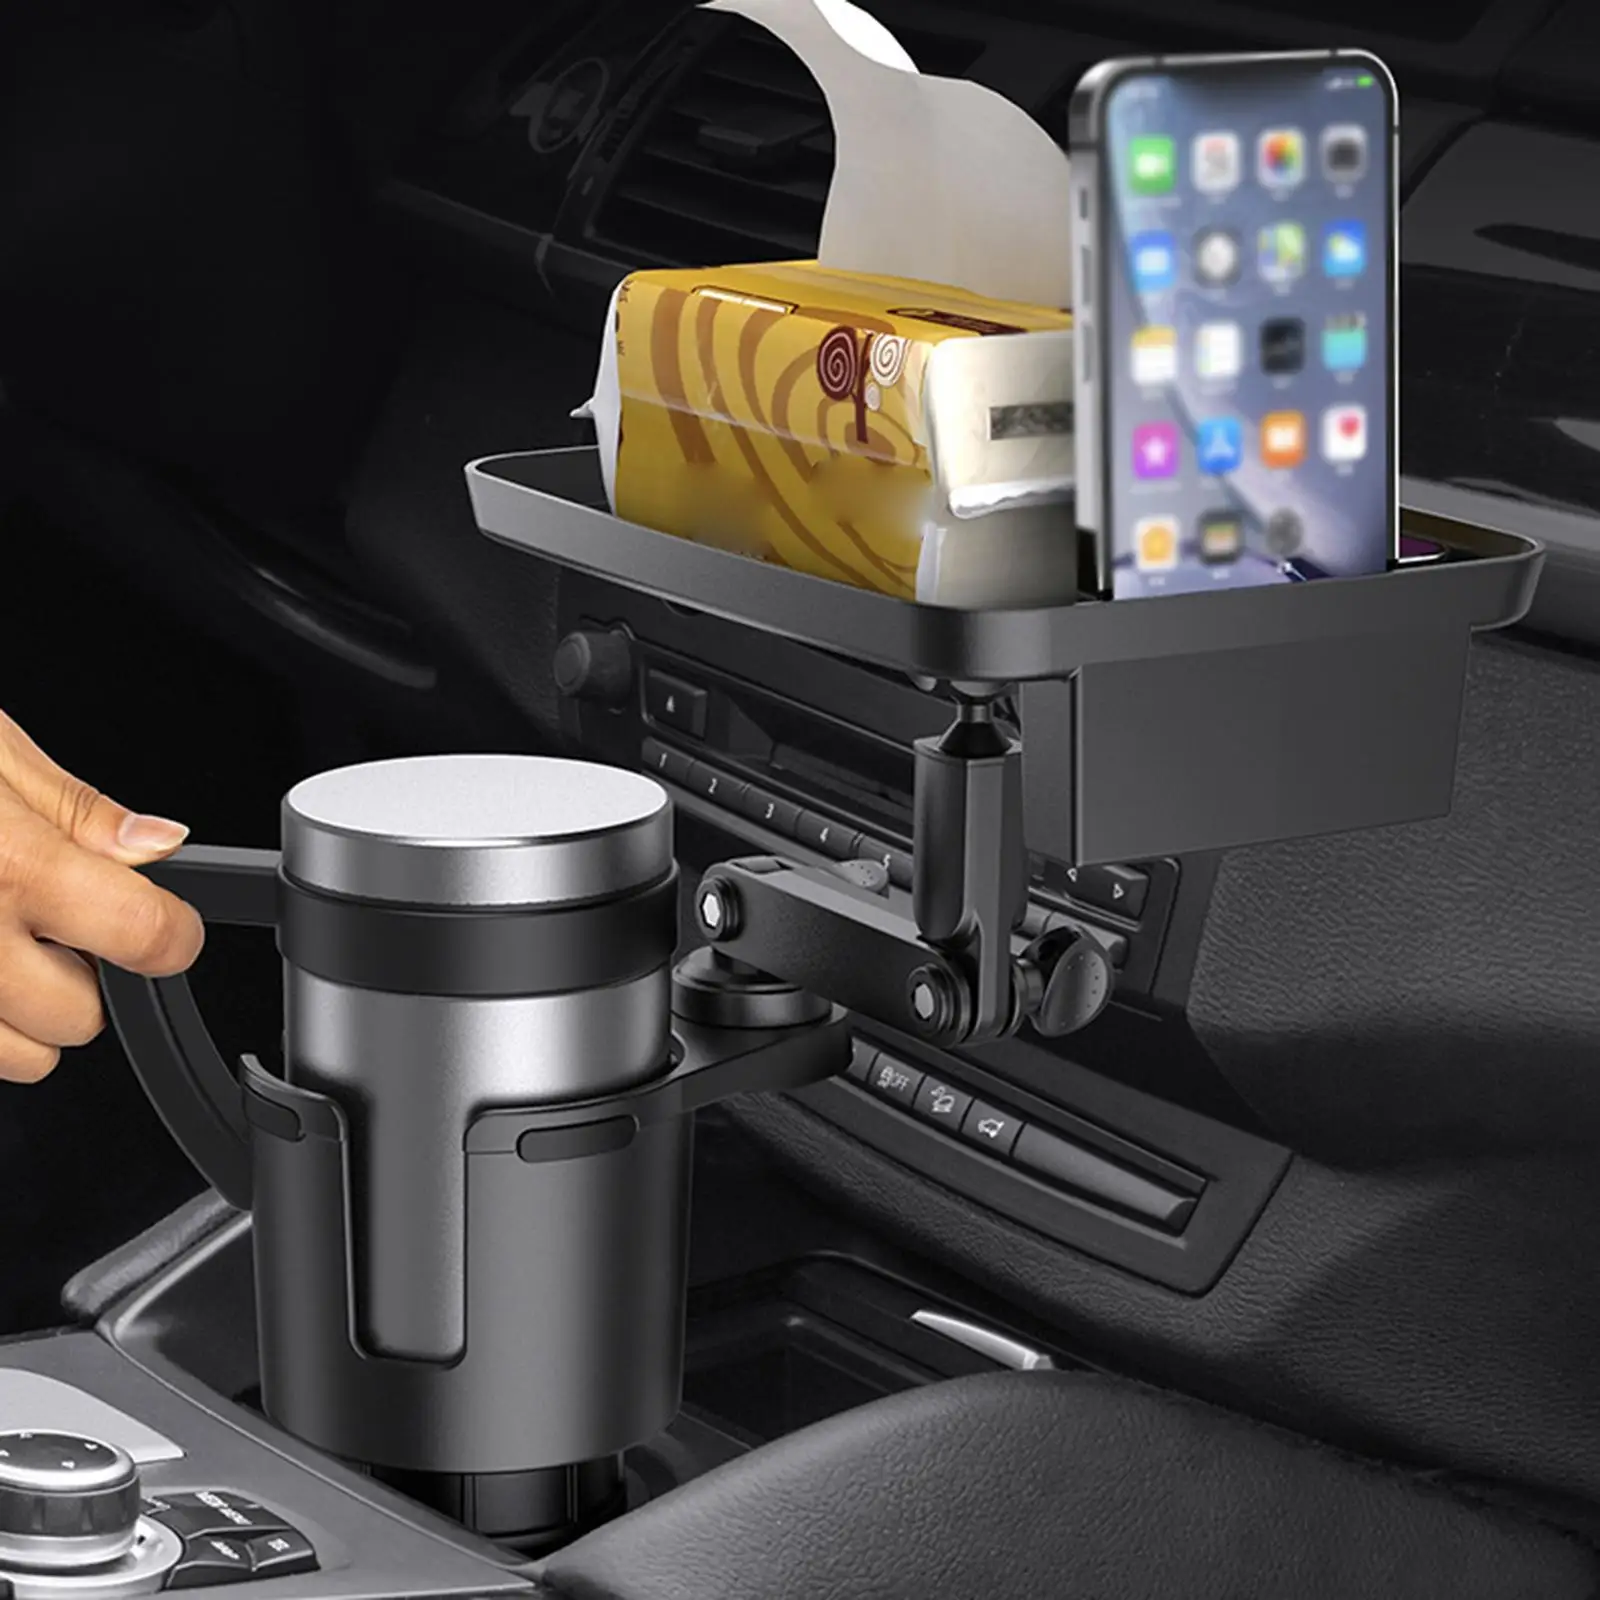 Car Cup Holder Storage Tray Adjustable Base Stable for Beverage Cups